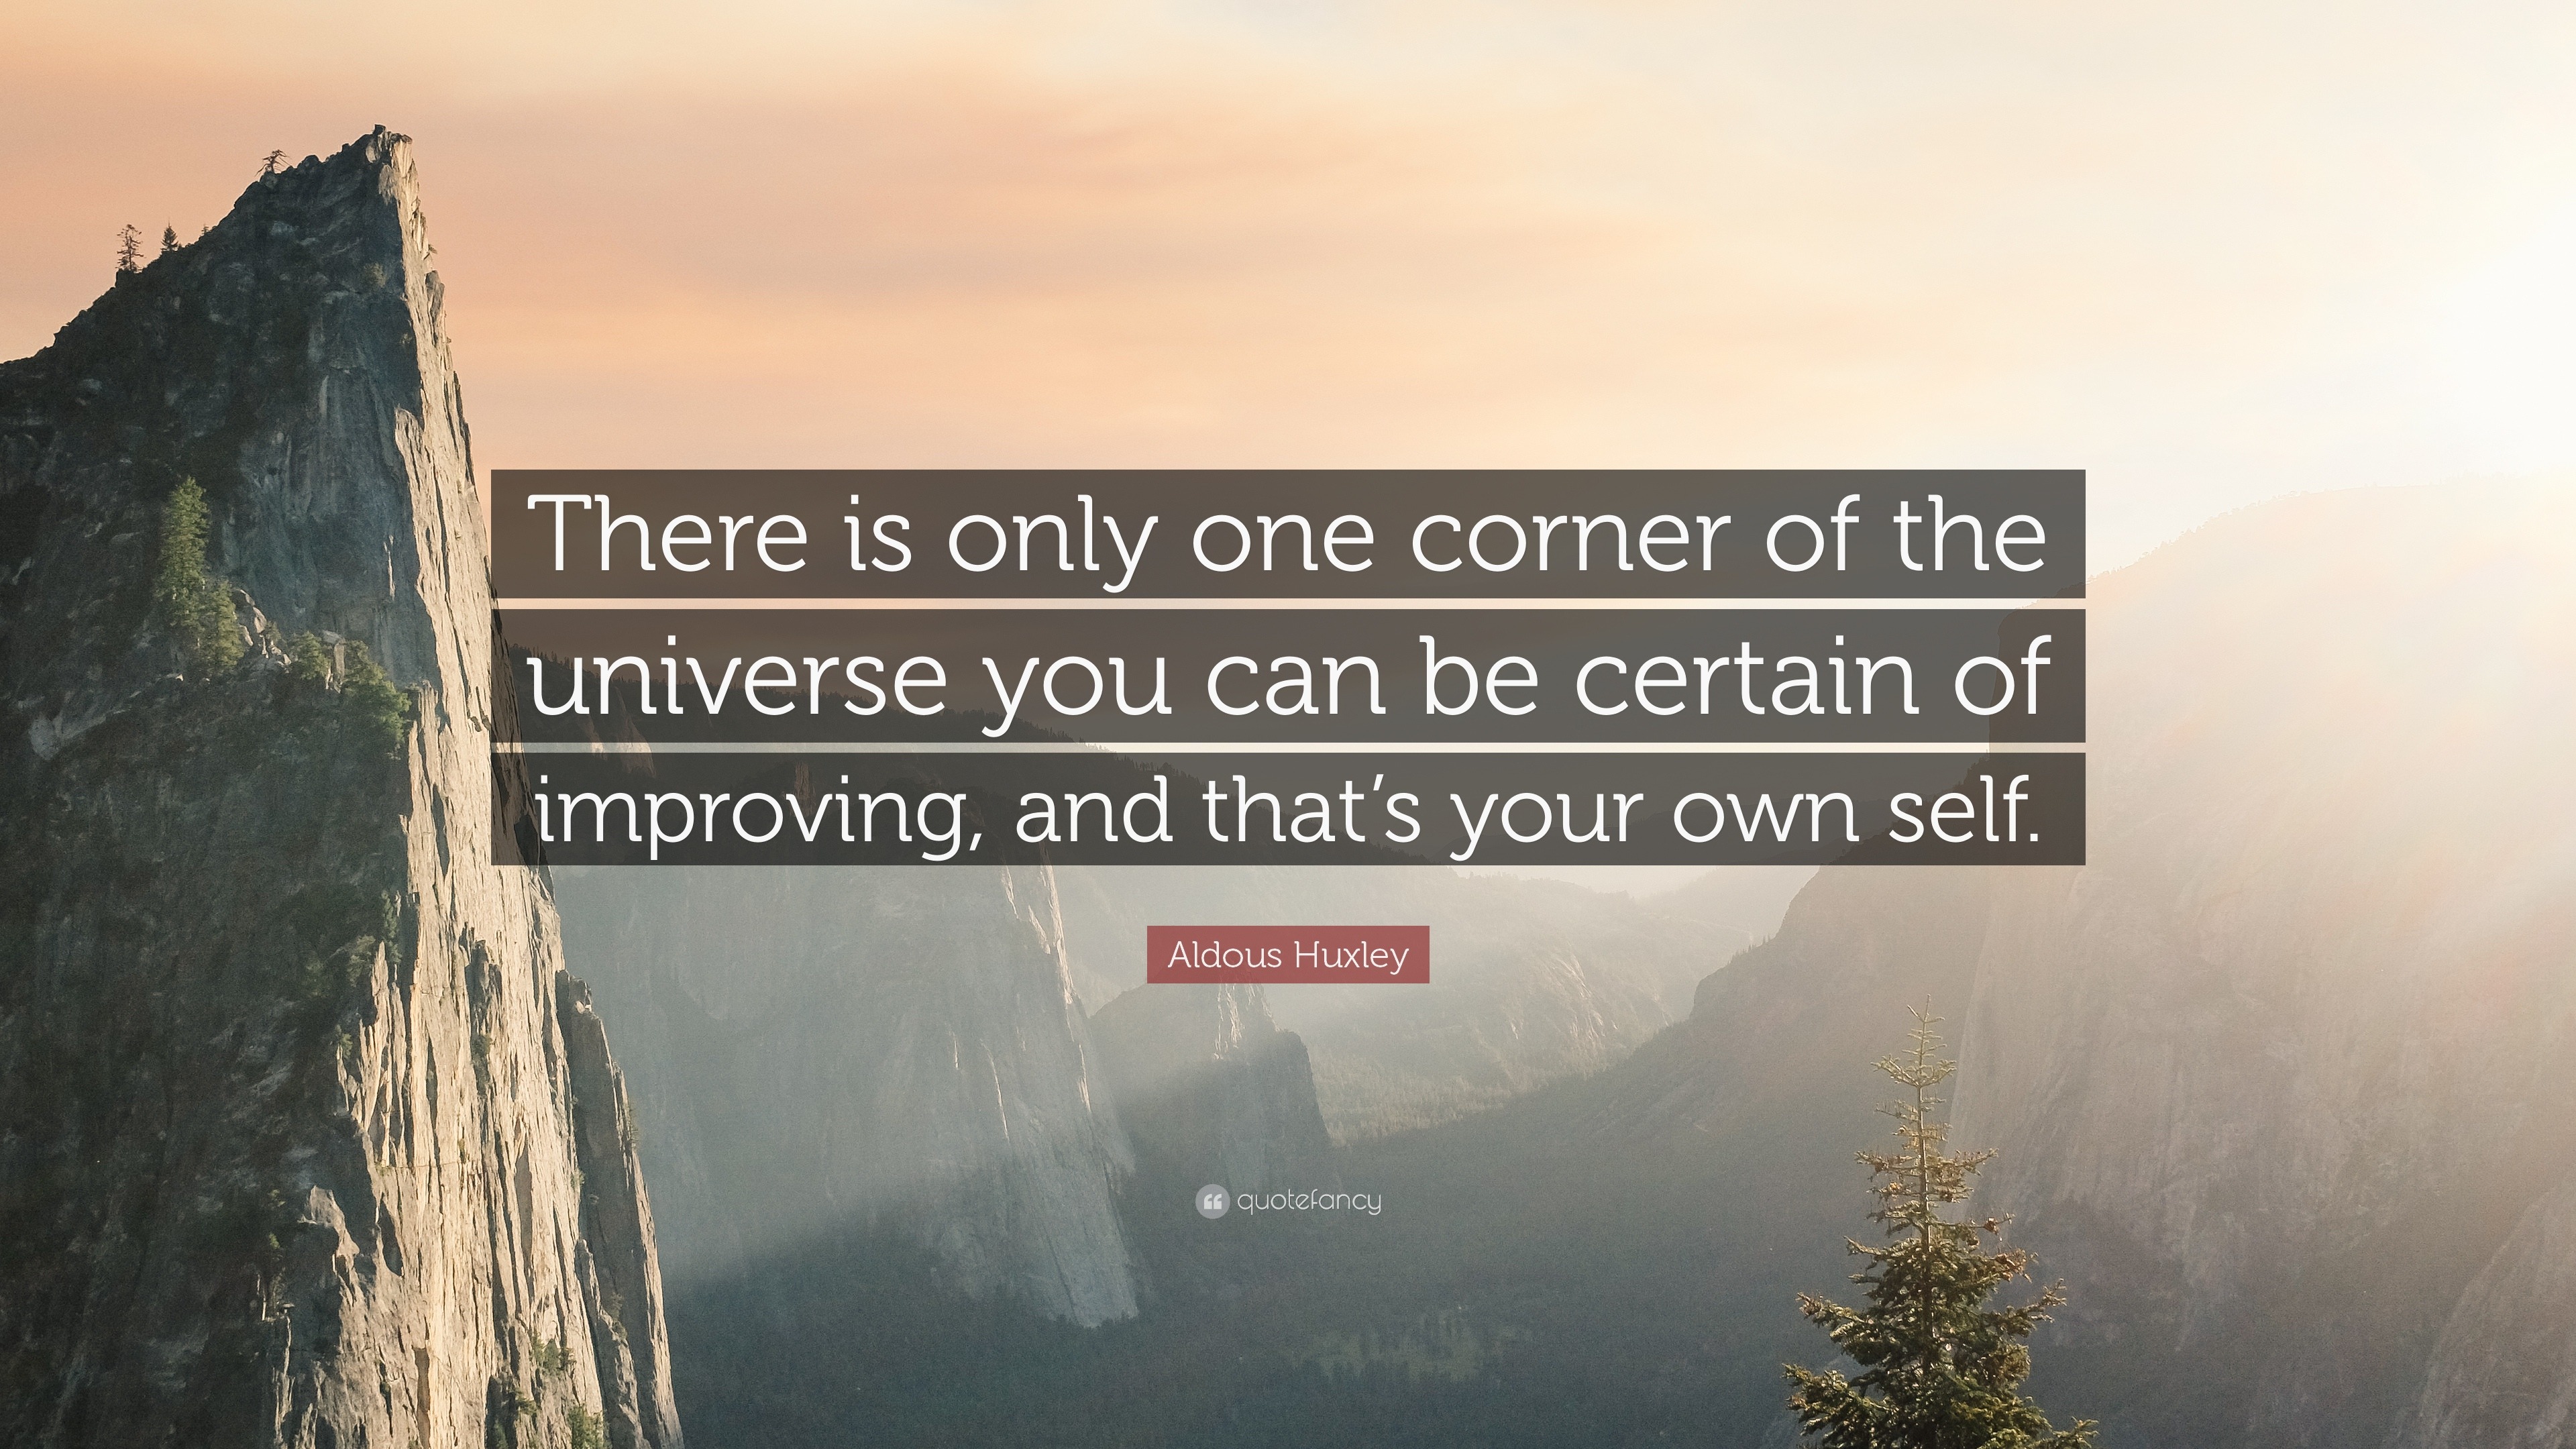 Aldous Huxley Quote: “There is only one corner of the universe you can ...